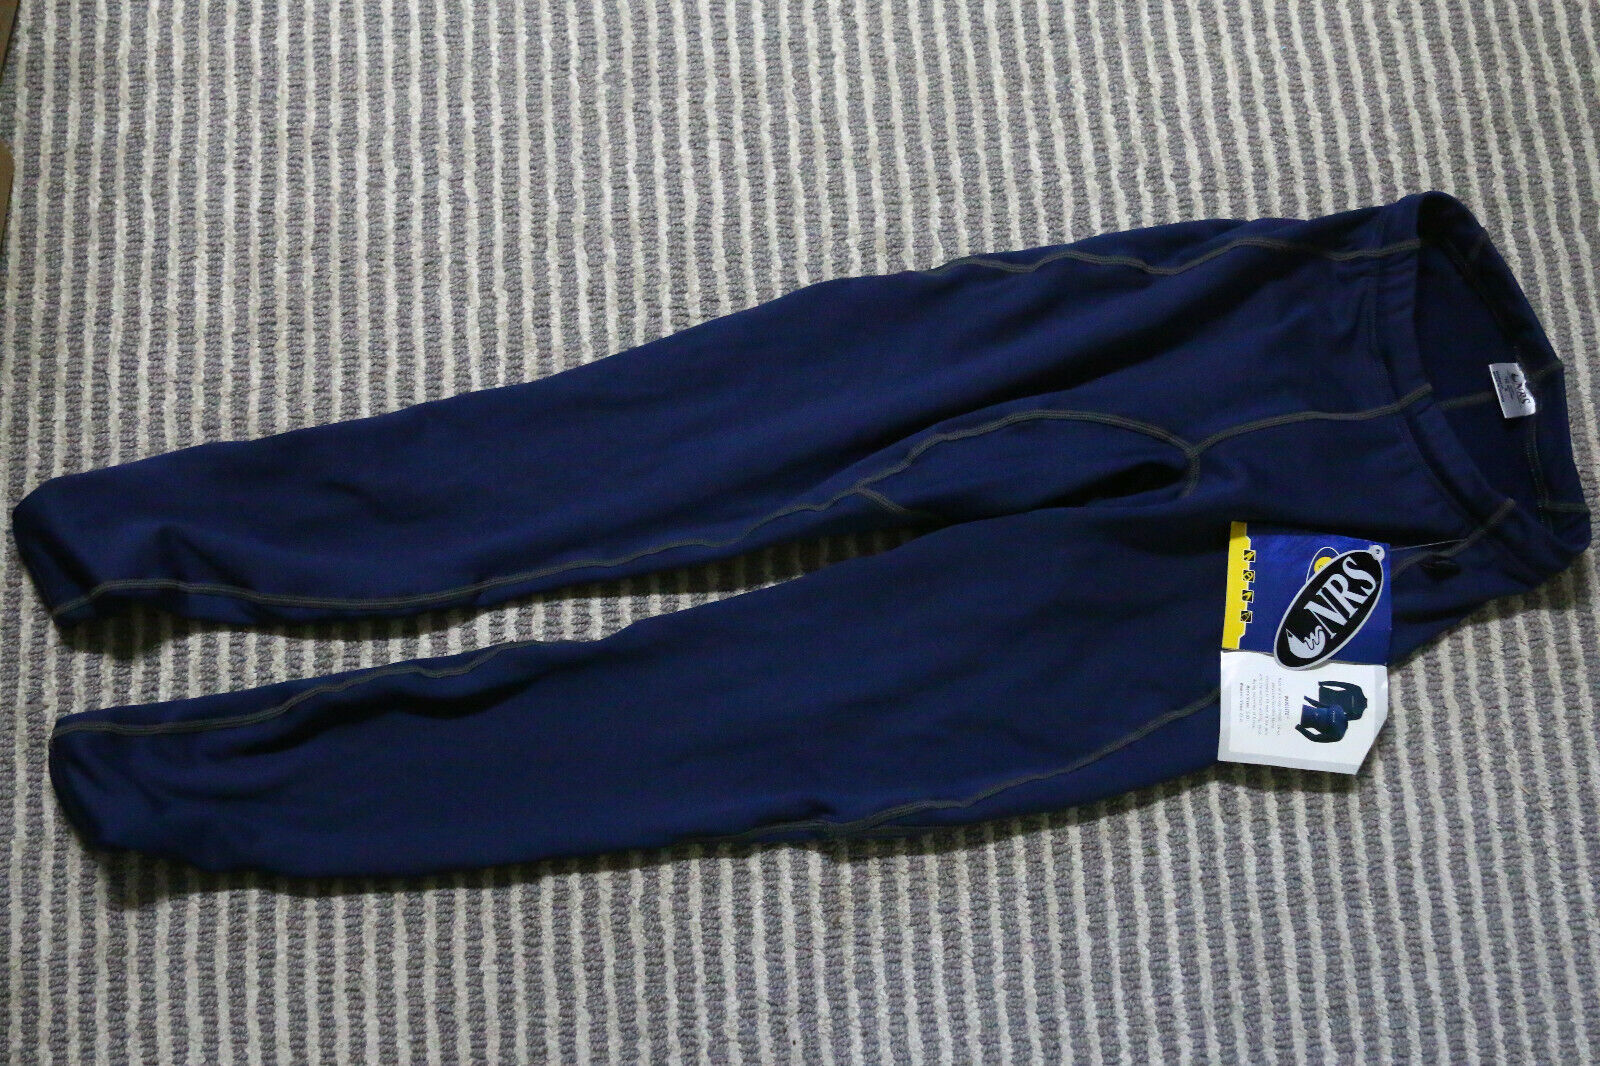 NEW before selling NRs Wavelite Mens Pants Fixed price for sale - Navy Blue Moisture Small NEW Wicking